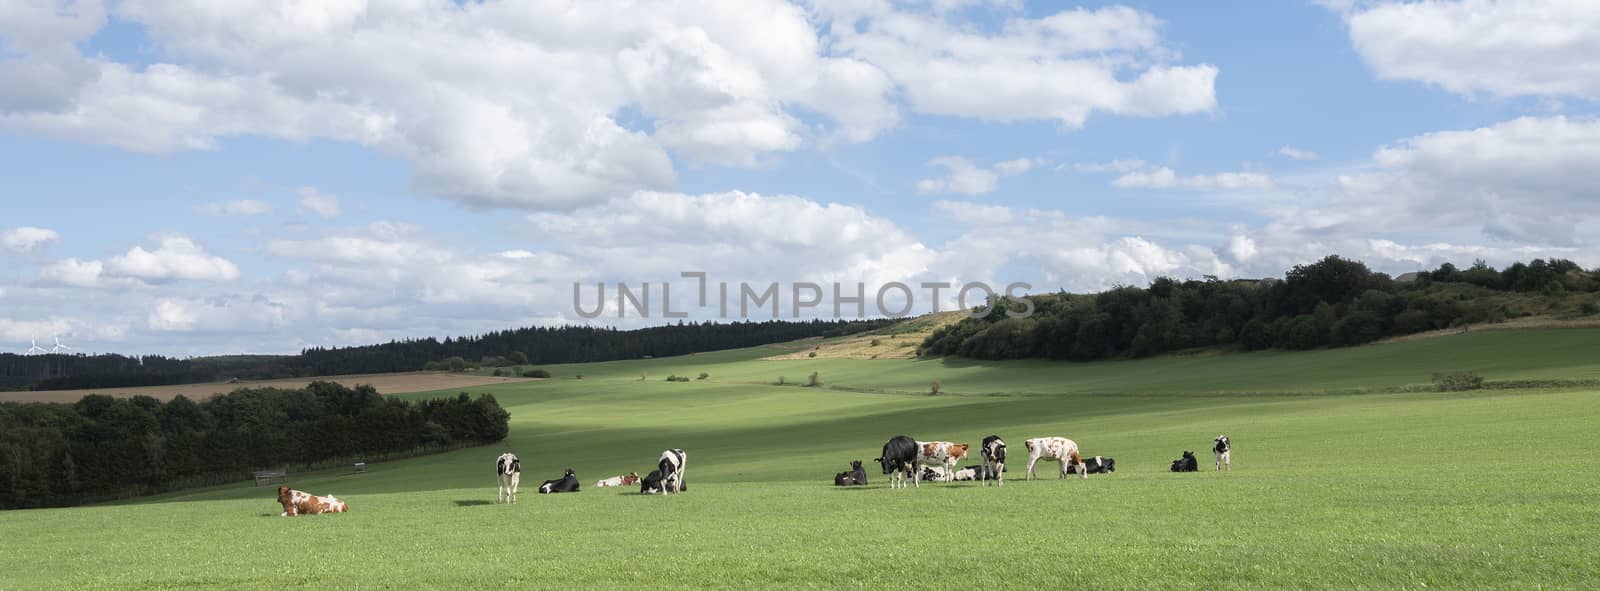 german vulkaneifel landscape with cows in meadows and fields under blue sky and clouds